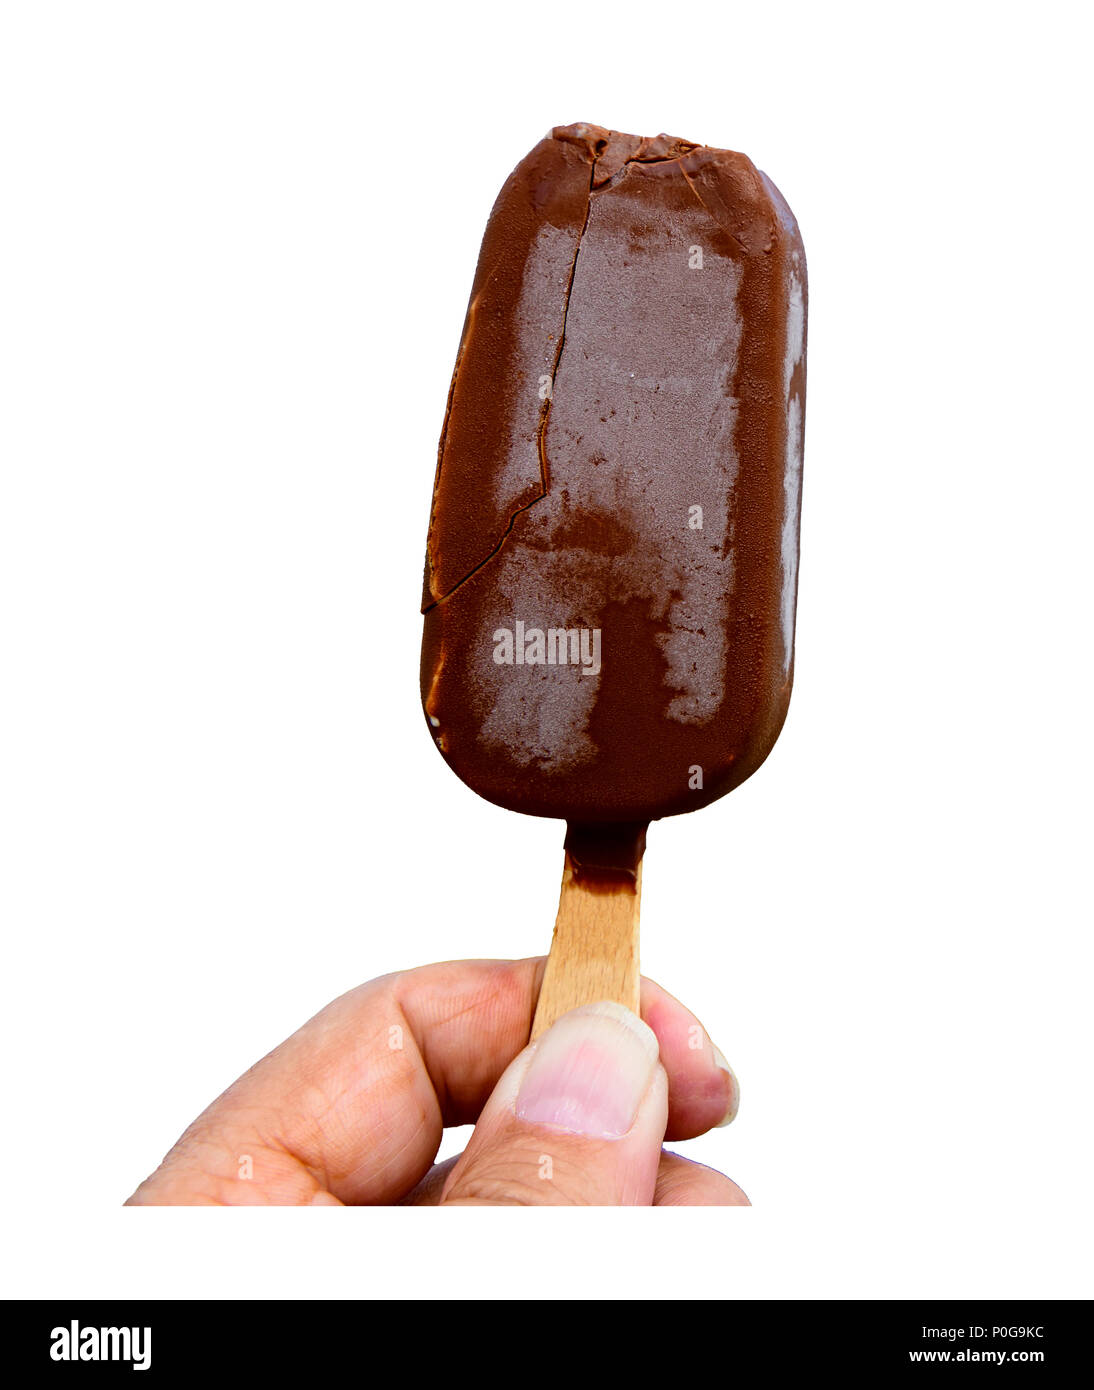 cut out of a hand holding a choc ice lolly Stock Photo